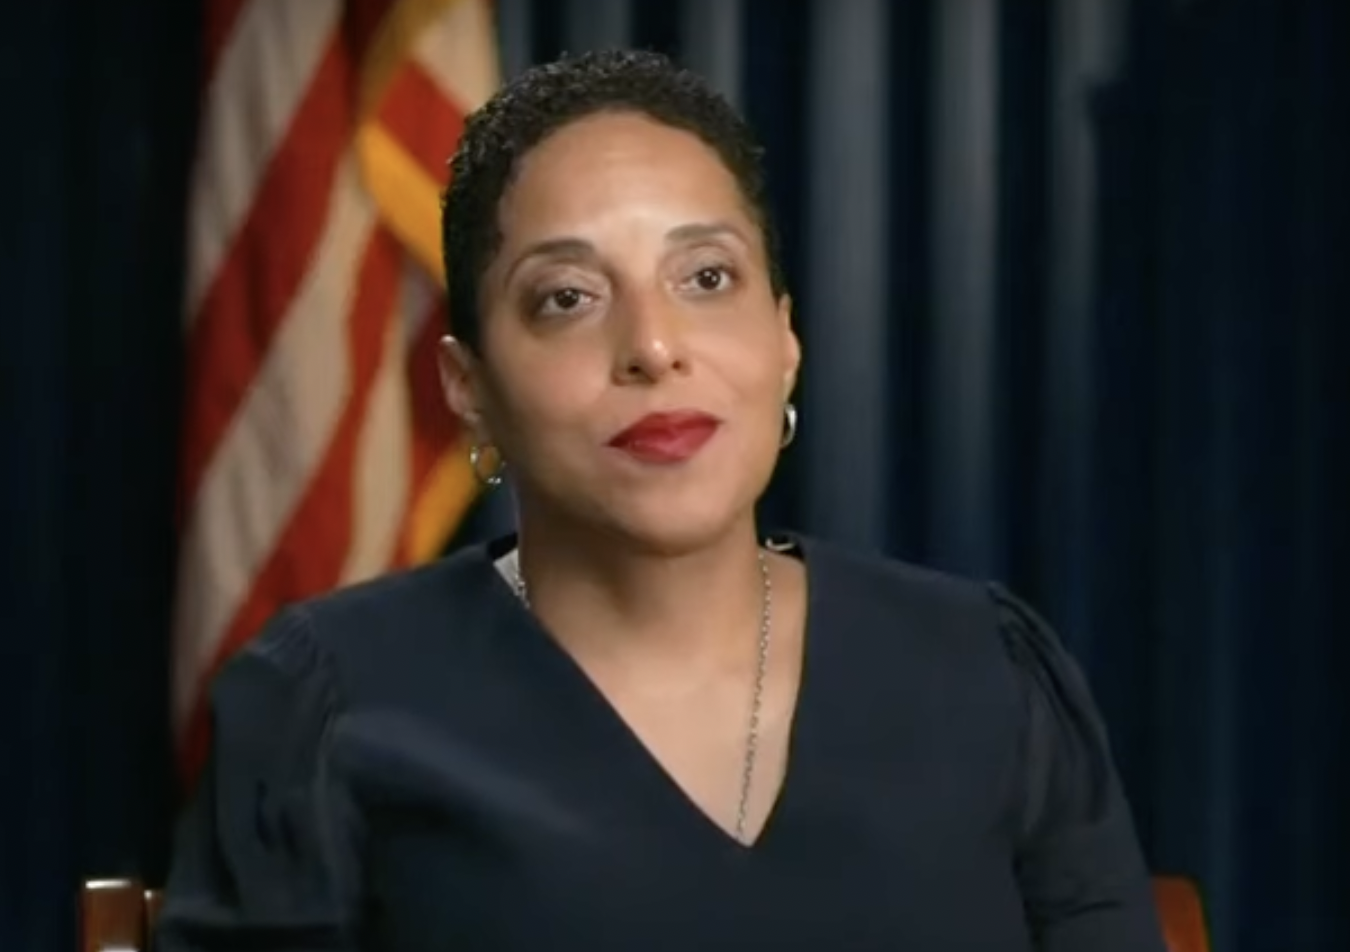 Soros-Backed St. Louis Prosecutor Facing Removal Blames Subordinates for ‘Possible Mistakes’